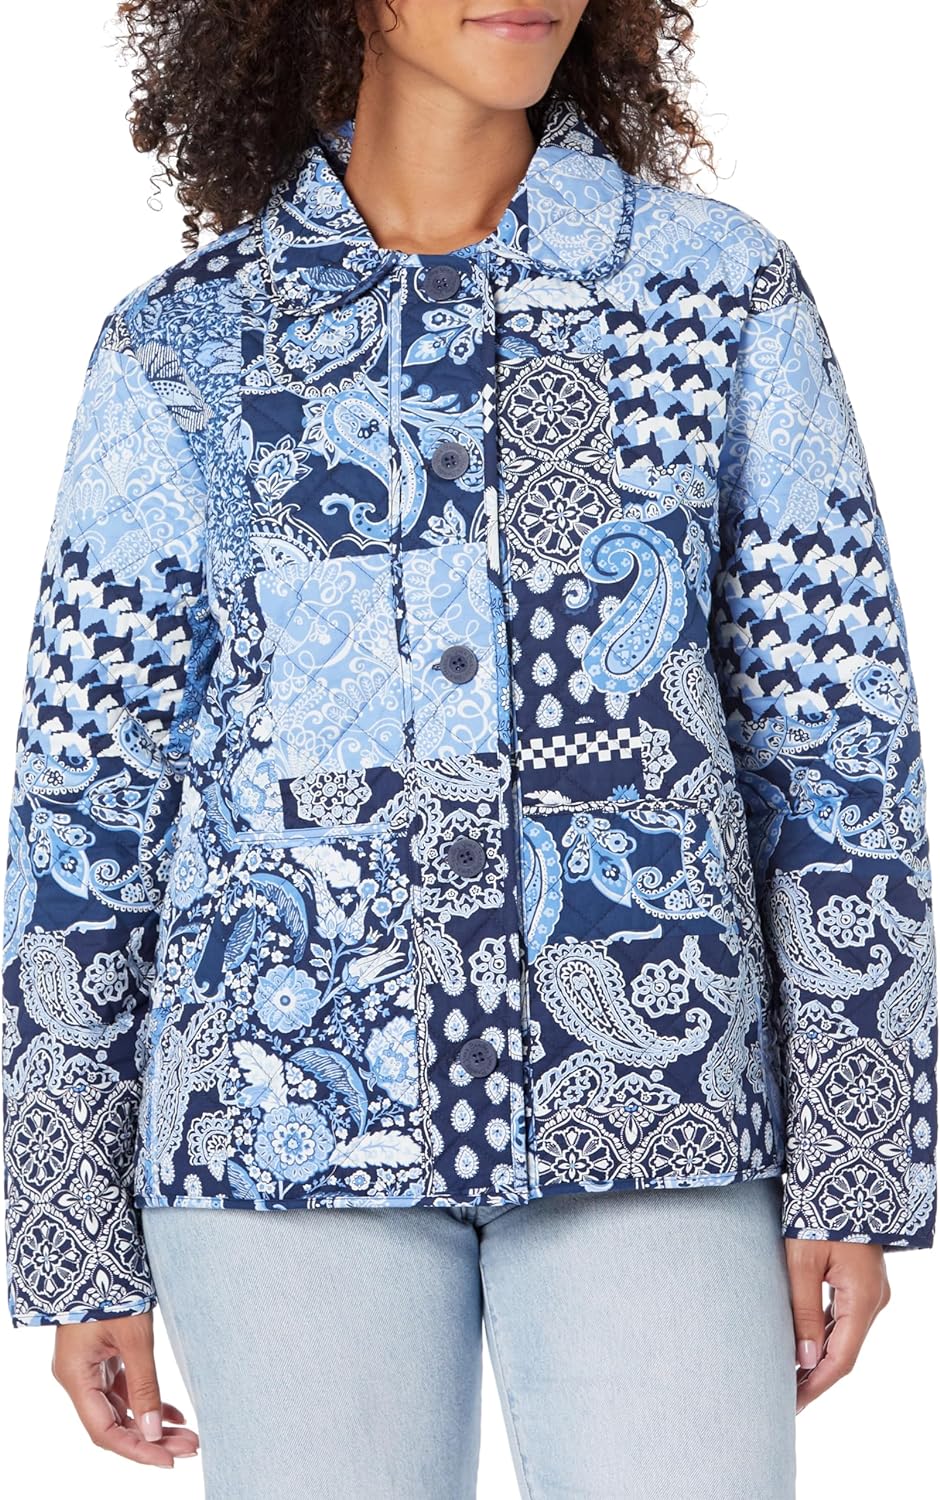 The paisley design is so pretty and the jacket is warm, the material soft and very high quality. I love the whimsical patterns and the signature quilting. It' lovely!